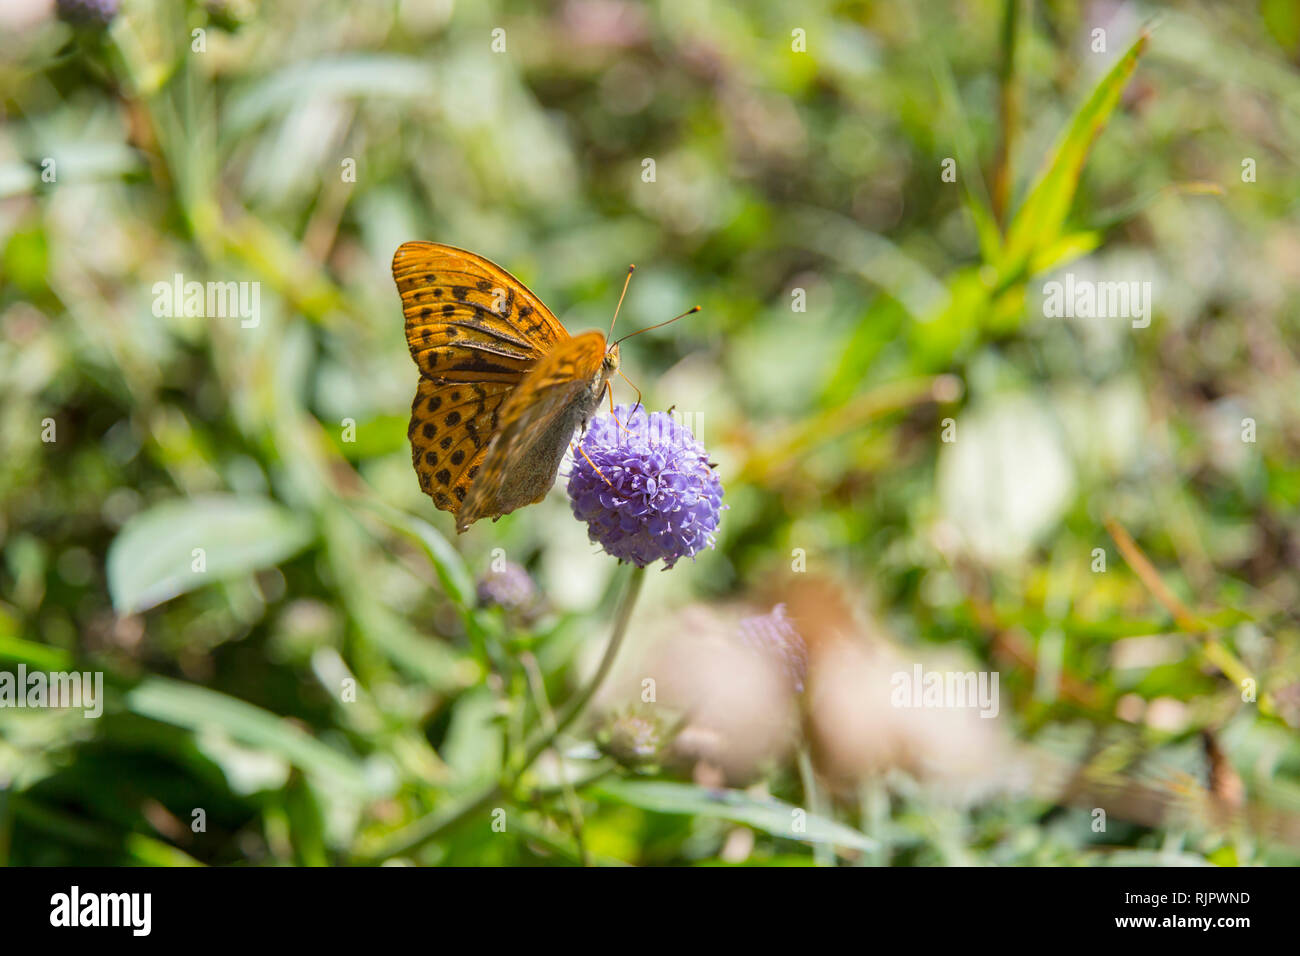 Silver-washed fritillary butterfly (argynnis paphia) on purple flowerhead, close up Stock Photo